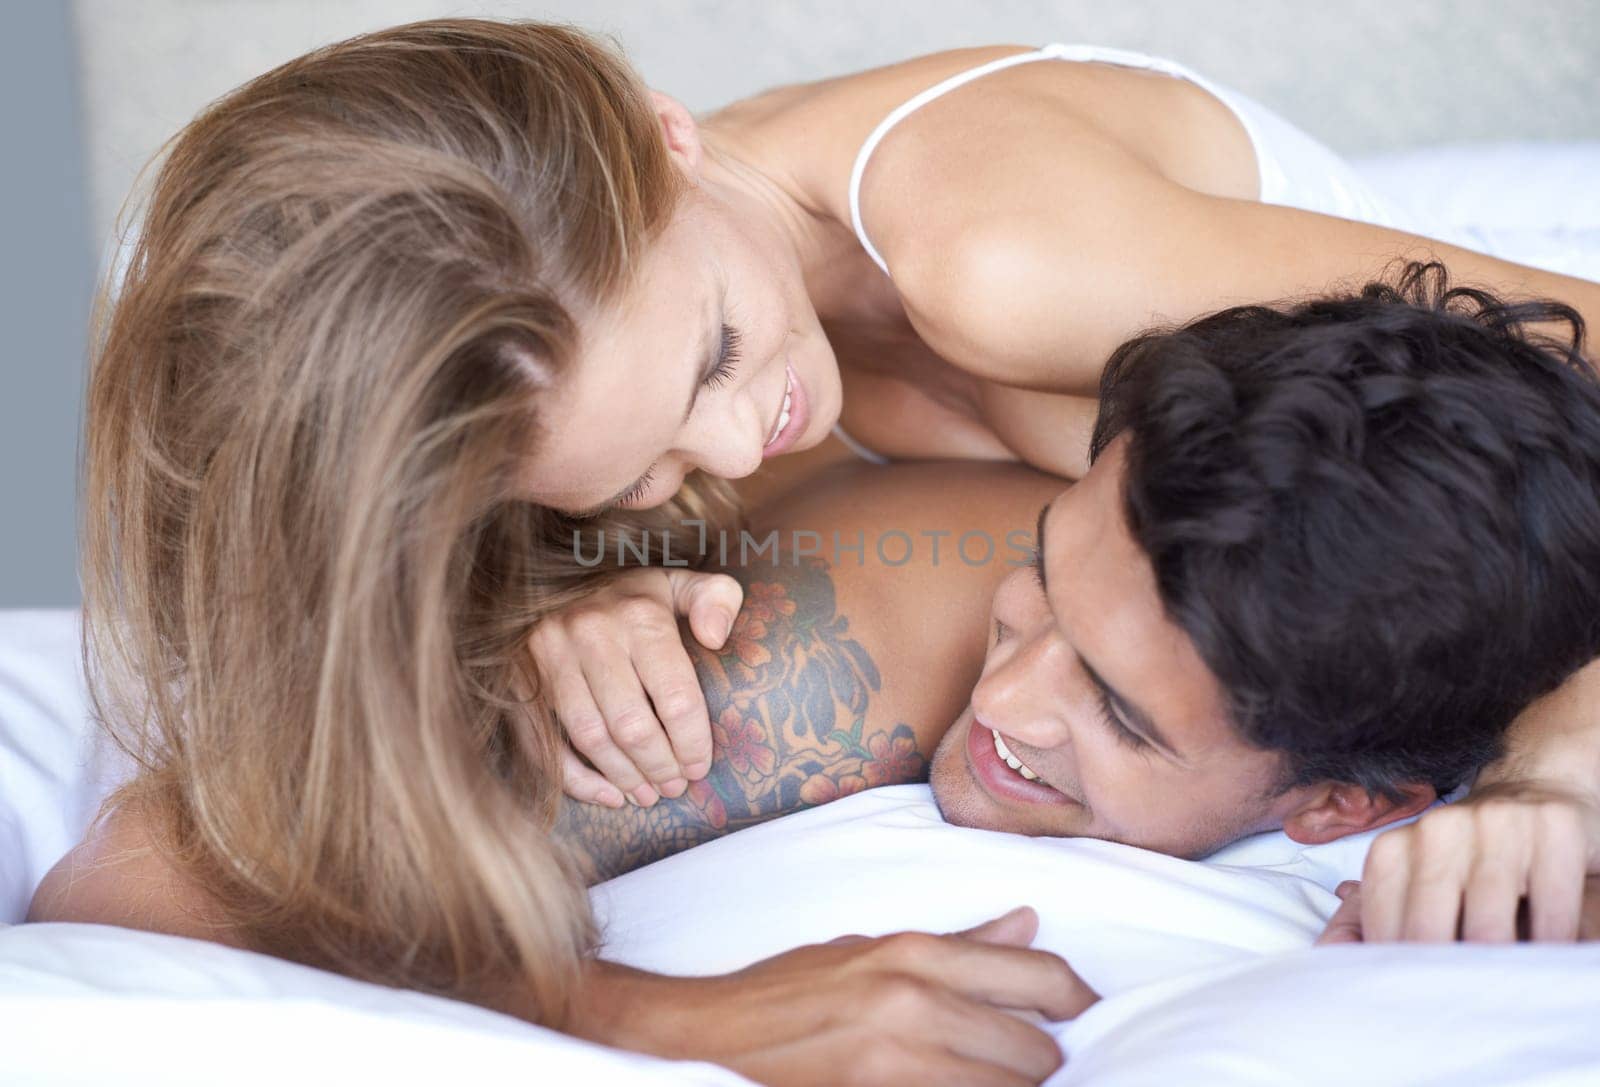 Happiness is being with you. A young couple acting playful in bed